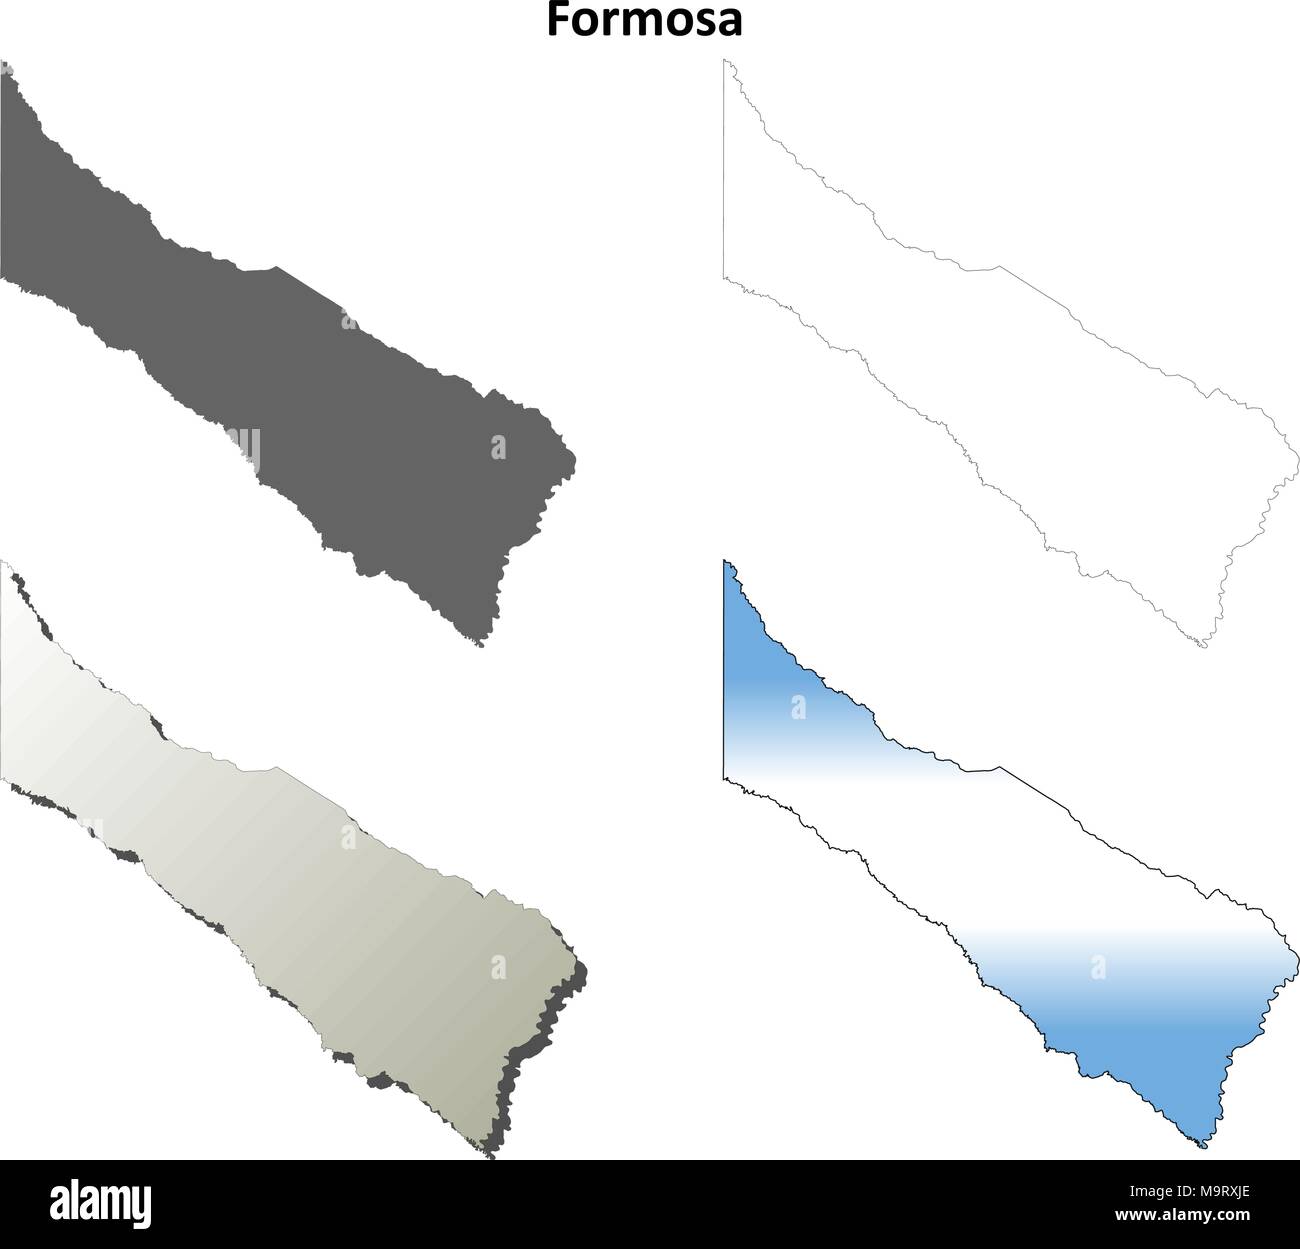 Formosa blank outline map set Stock Vector